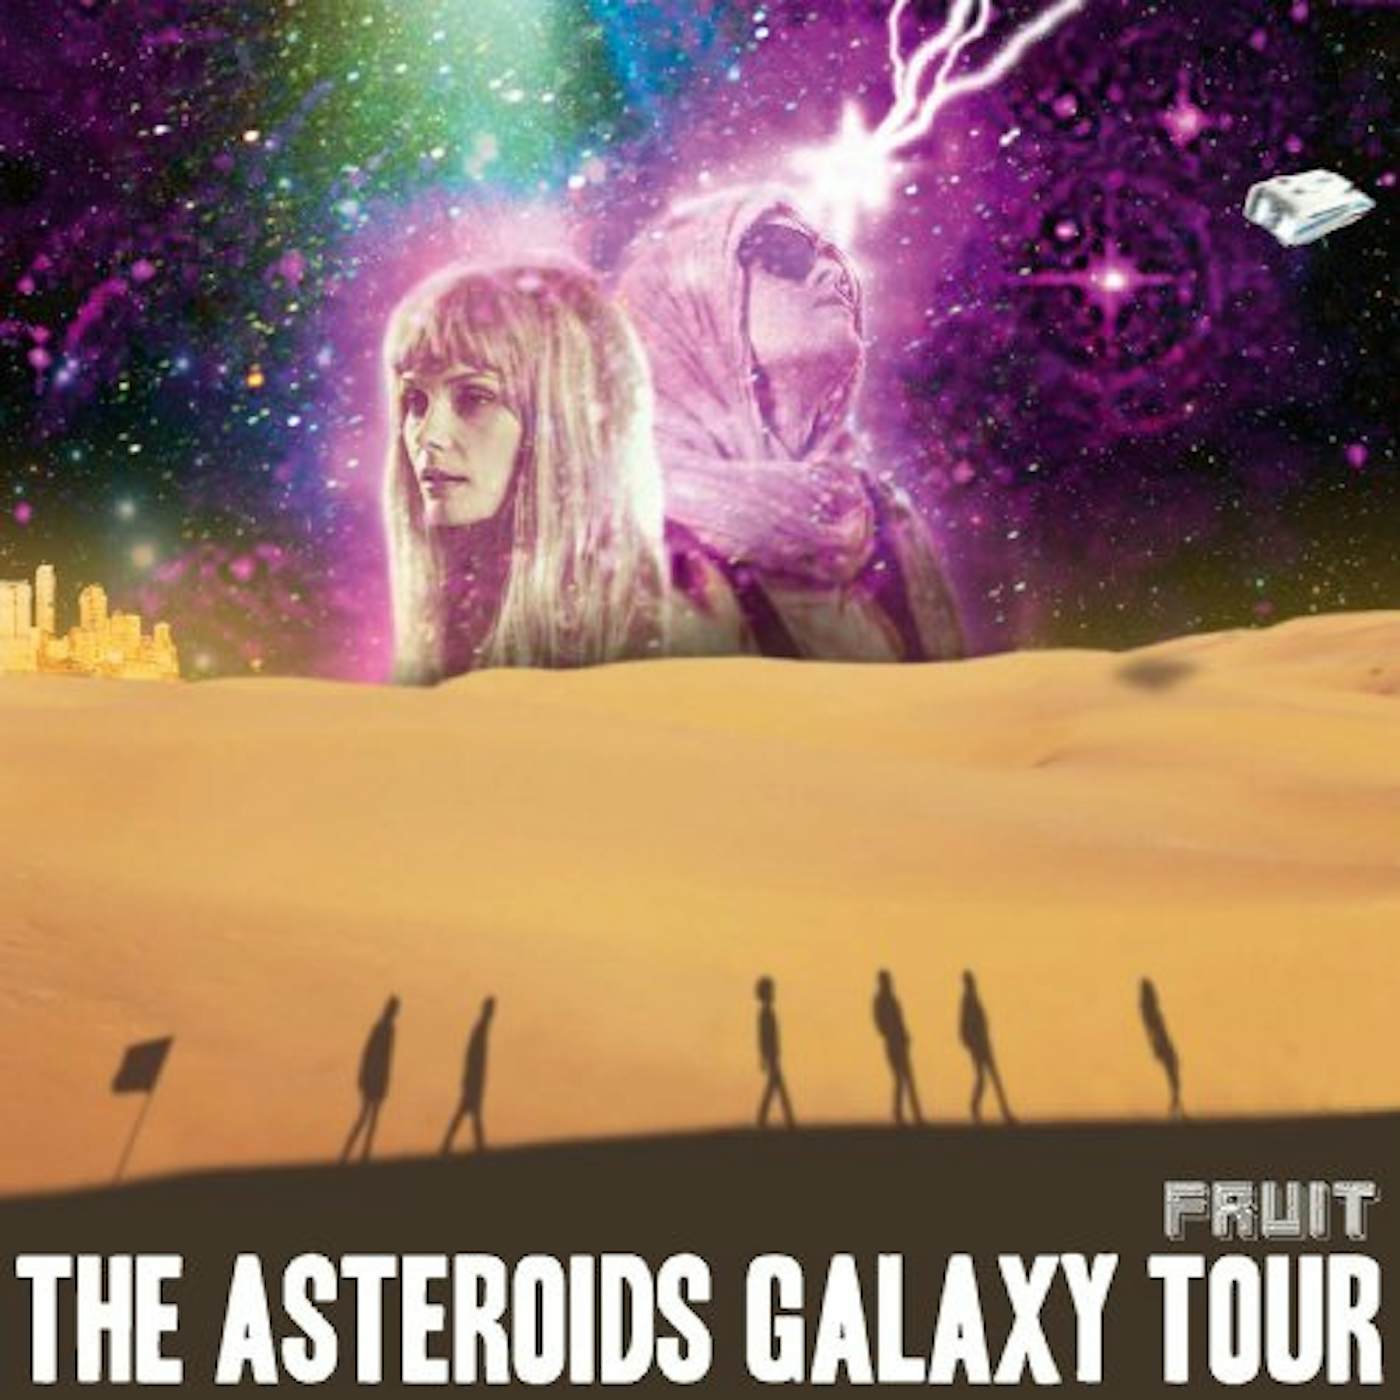 The Asteroids Galaxy Tour FRUIT CD